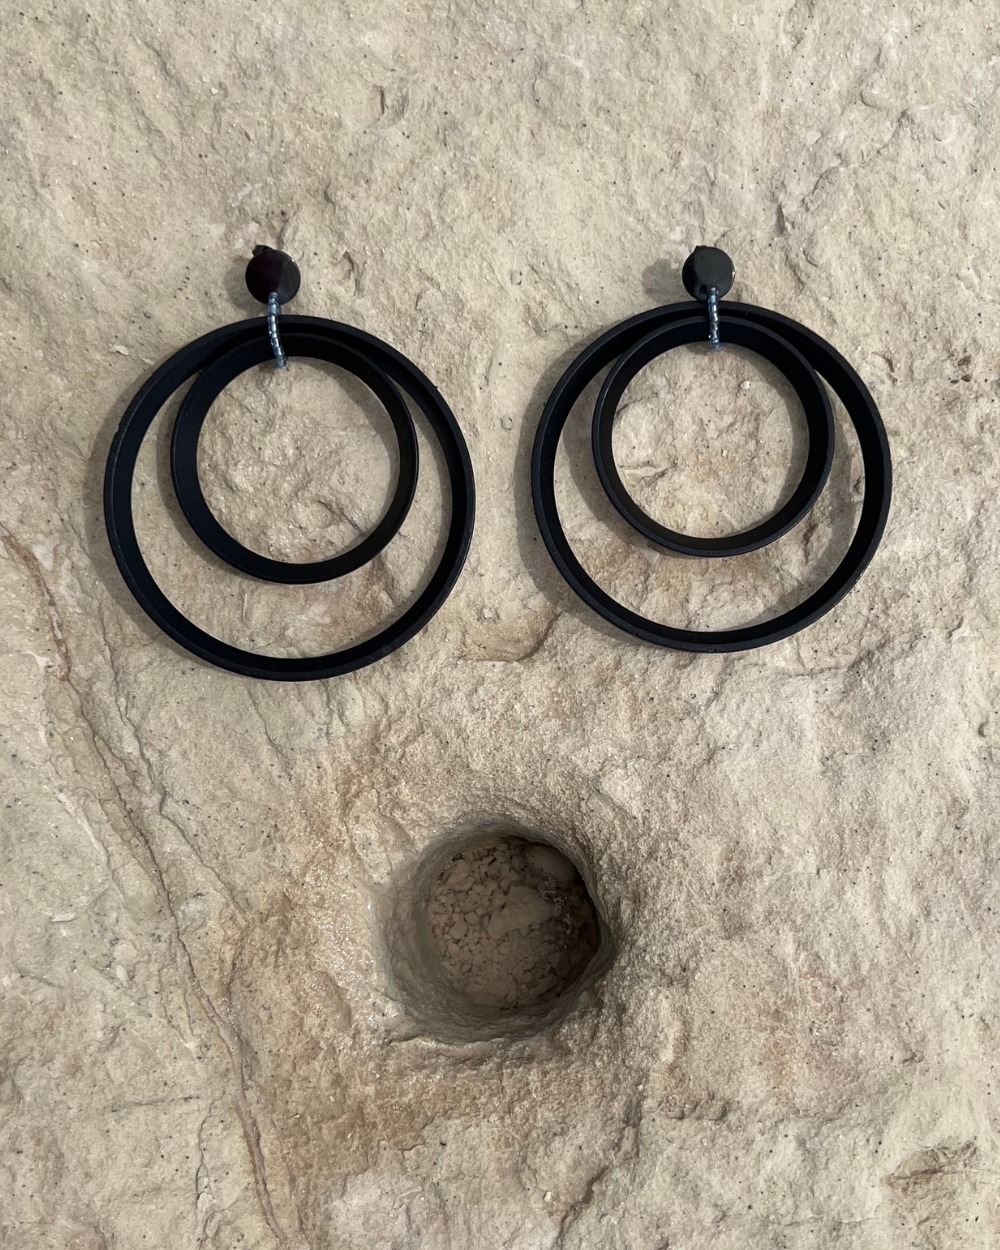 Minimalist earrings crafted from spotlight parts, featuring large metal circles in sleek black or white for a bold, modern look.